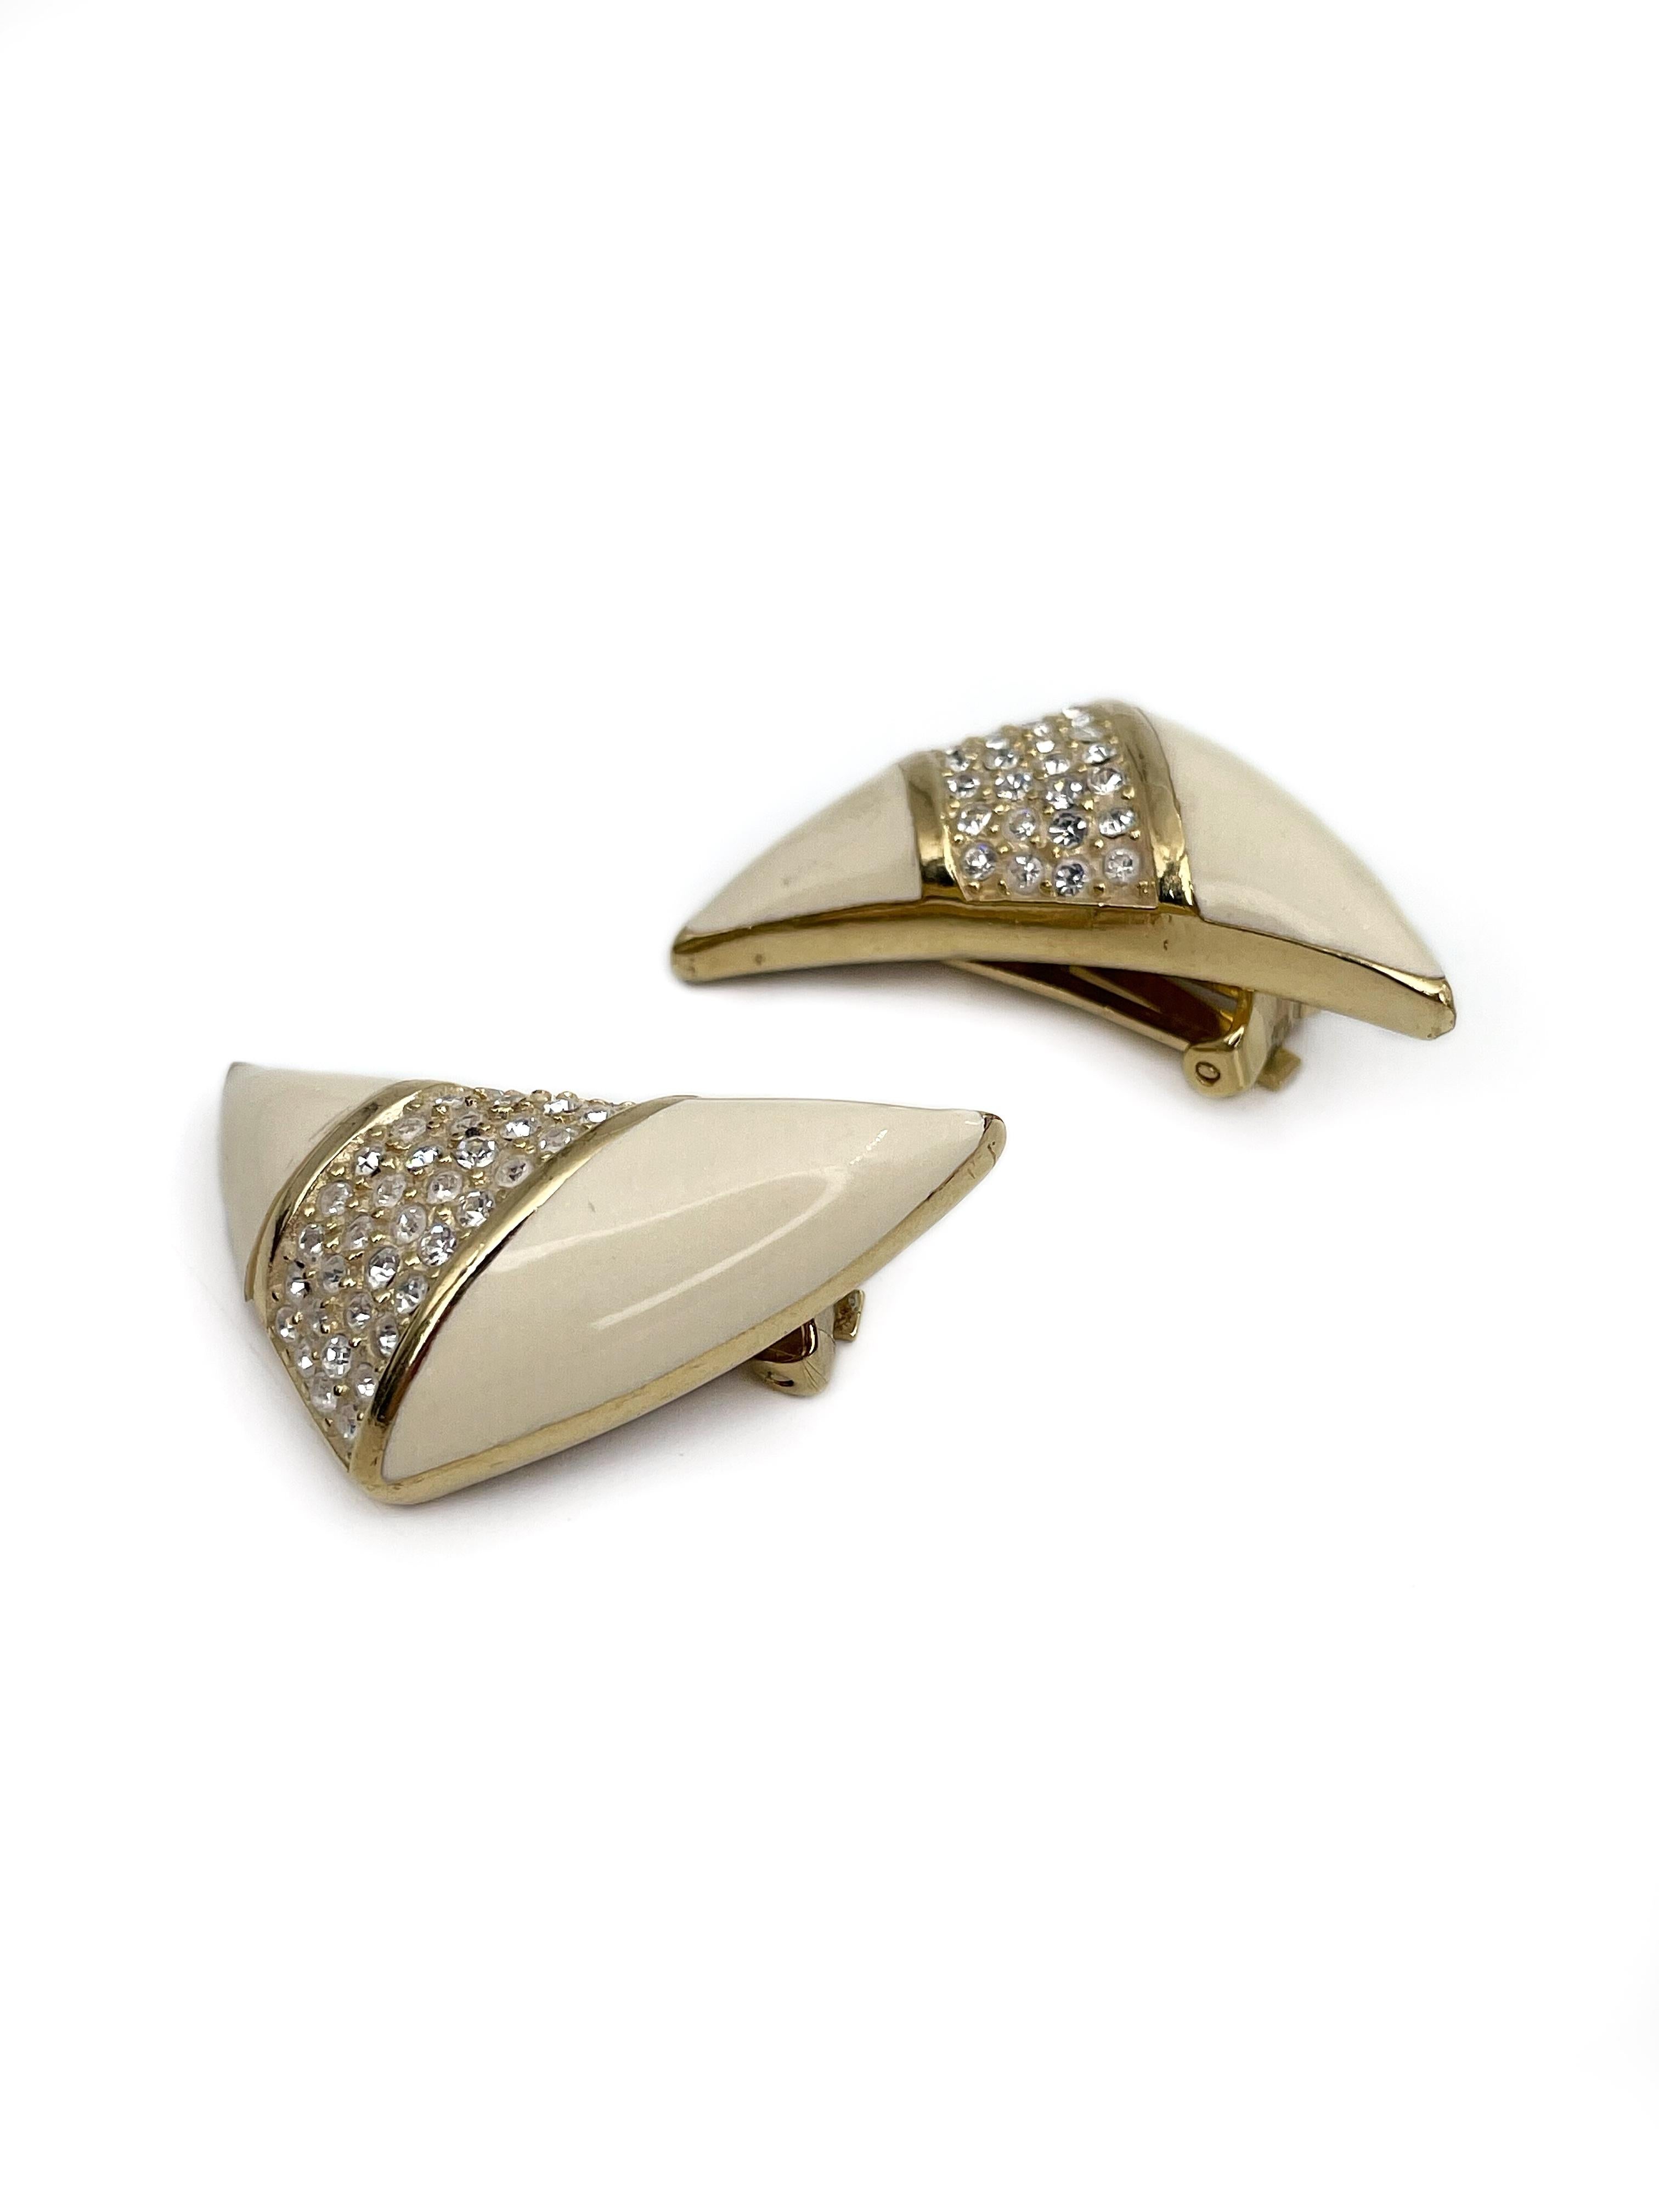 This is a beautiful pair of triangle clip on earrings designed by Christian Dior in 1980’s. The piece is gold plated, adorned with creamy white enamel and clear rhinestones. 

Markings: “Chr. Dior©Germany” (shown in photos).

Size: 4x2.5cm

———

If